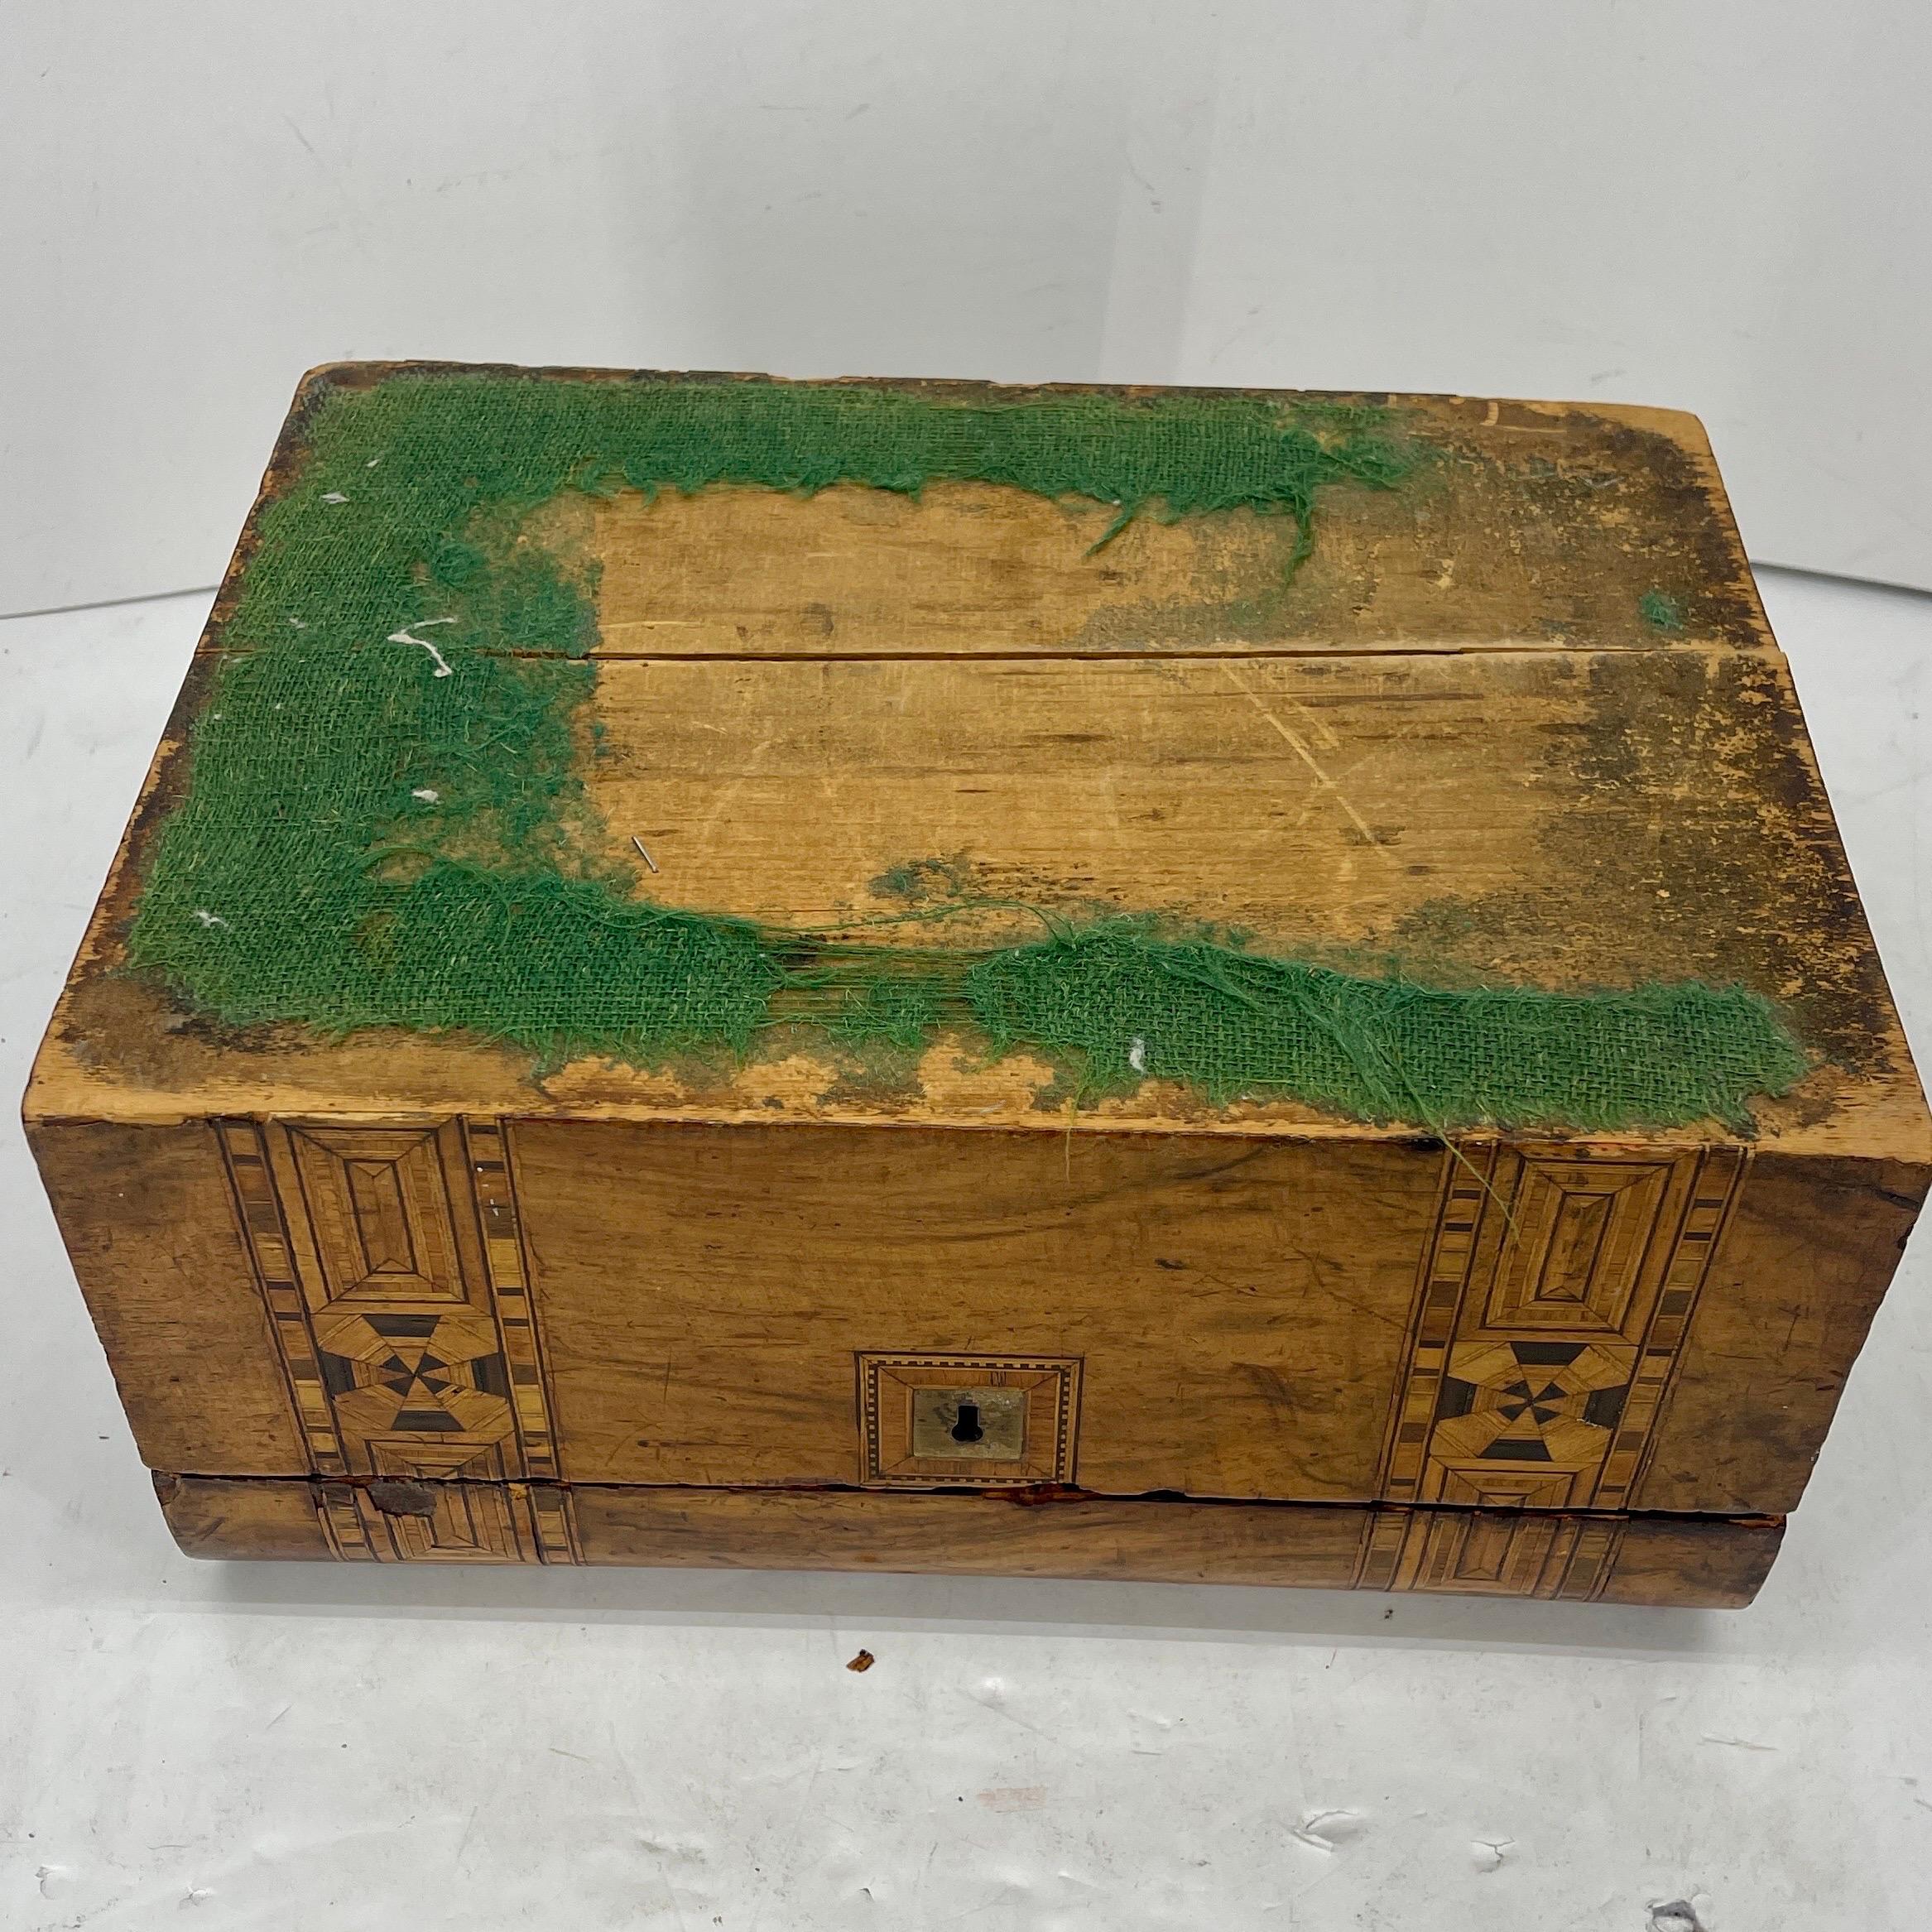 Swedish Inlaid Fruitwood and Veneered Box with Curved Top Early 19th Century For Sale 12